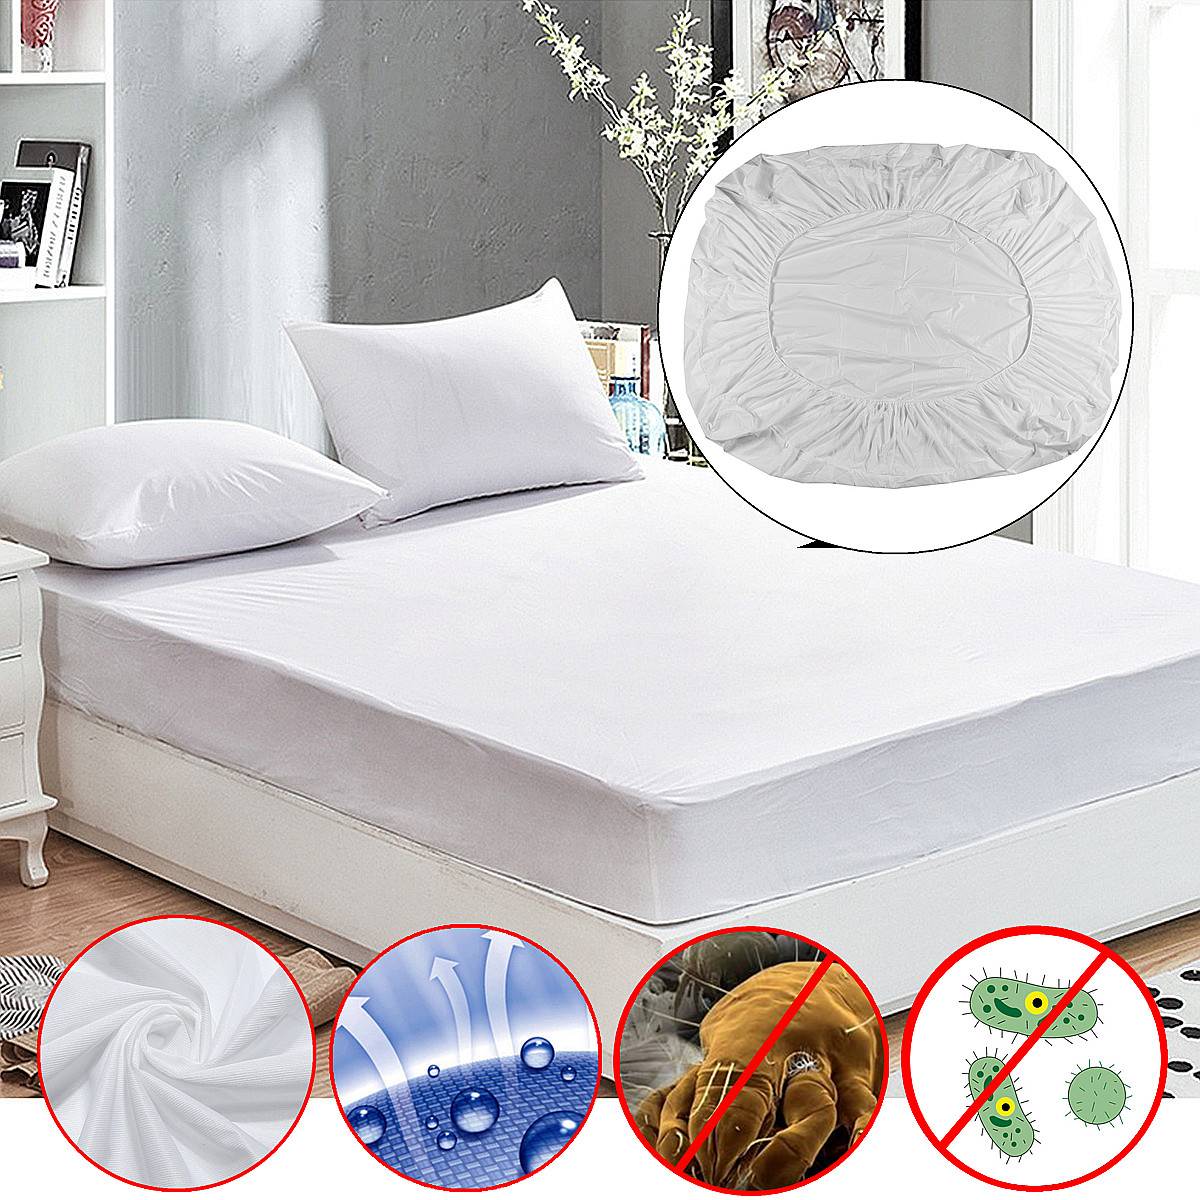 Mattress Protector Cover Waterproof Anti Dust Mite Breathable Fitted Bed Sheet Machine Washable 160x200+30cm/200x200+30cm